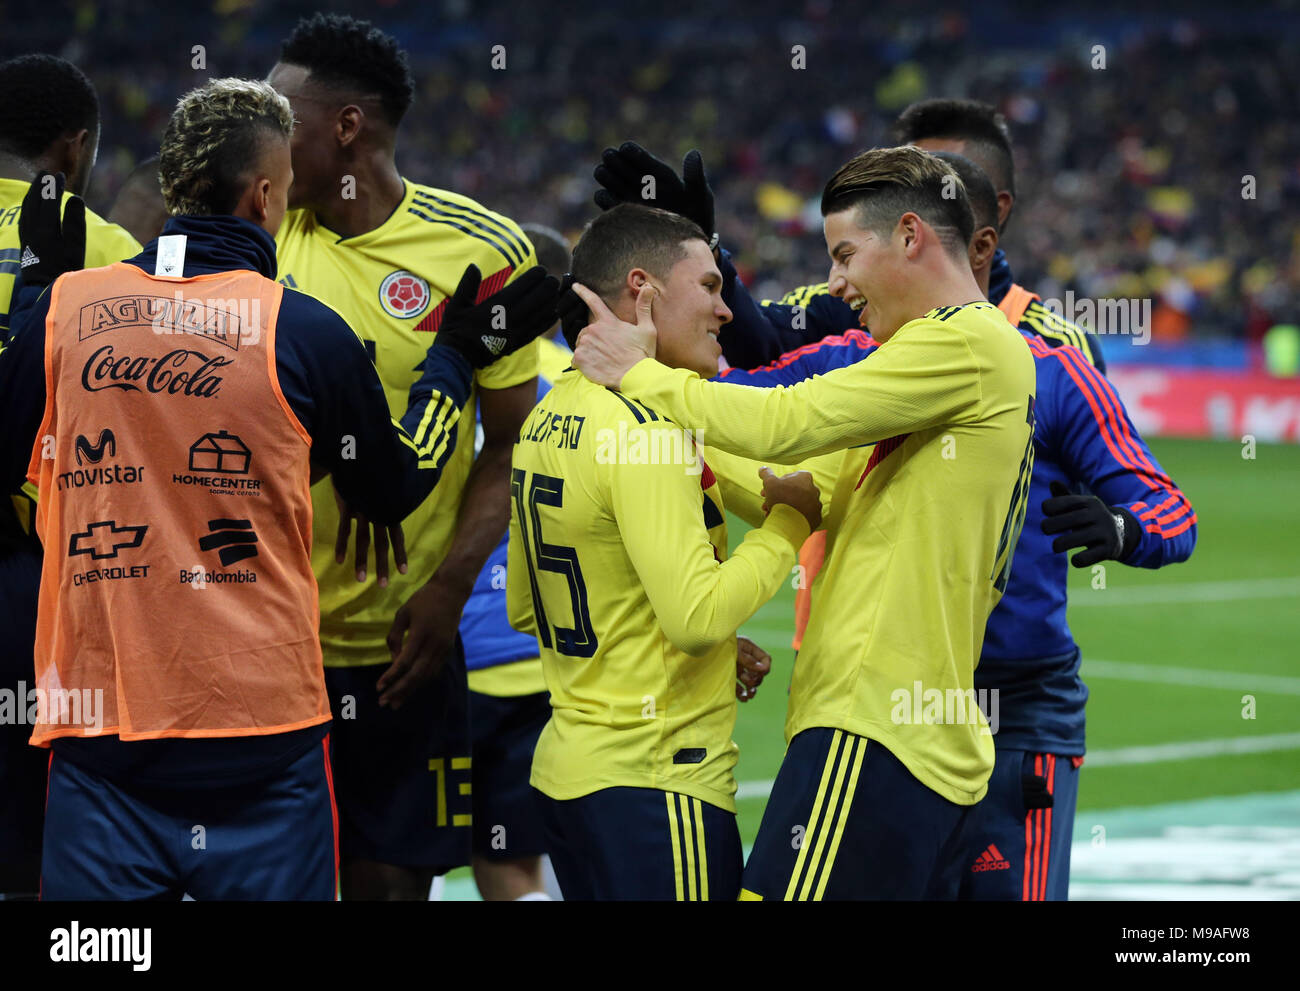 James Rodriguez, Juan Fernando Quintero (COL), MARCH 23, 2018 - Football / Soccer : International friendly match between France 2-3 Colombia at Stade de France in Saint-Denis, France, (Photo by AFLO)  3 Stock Photo